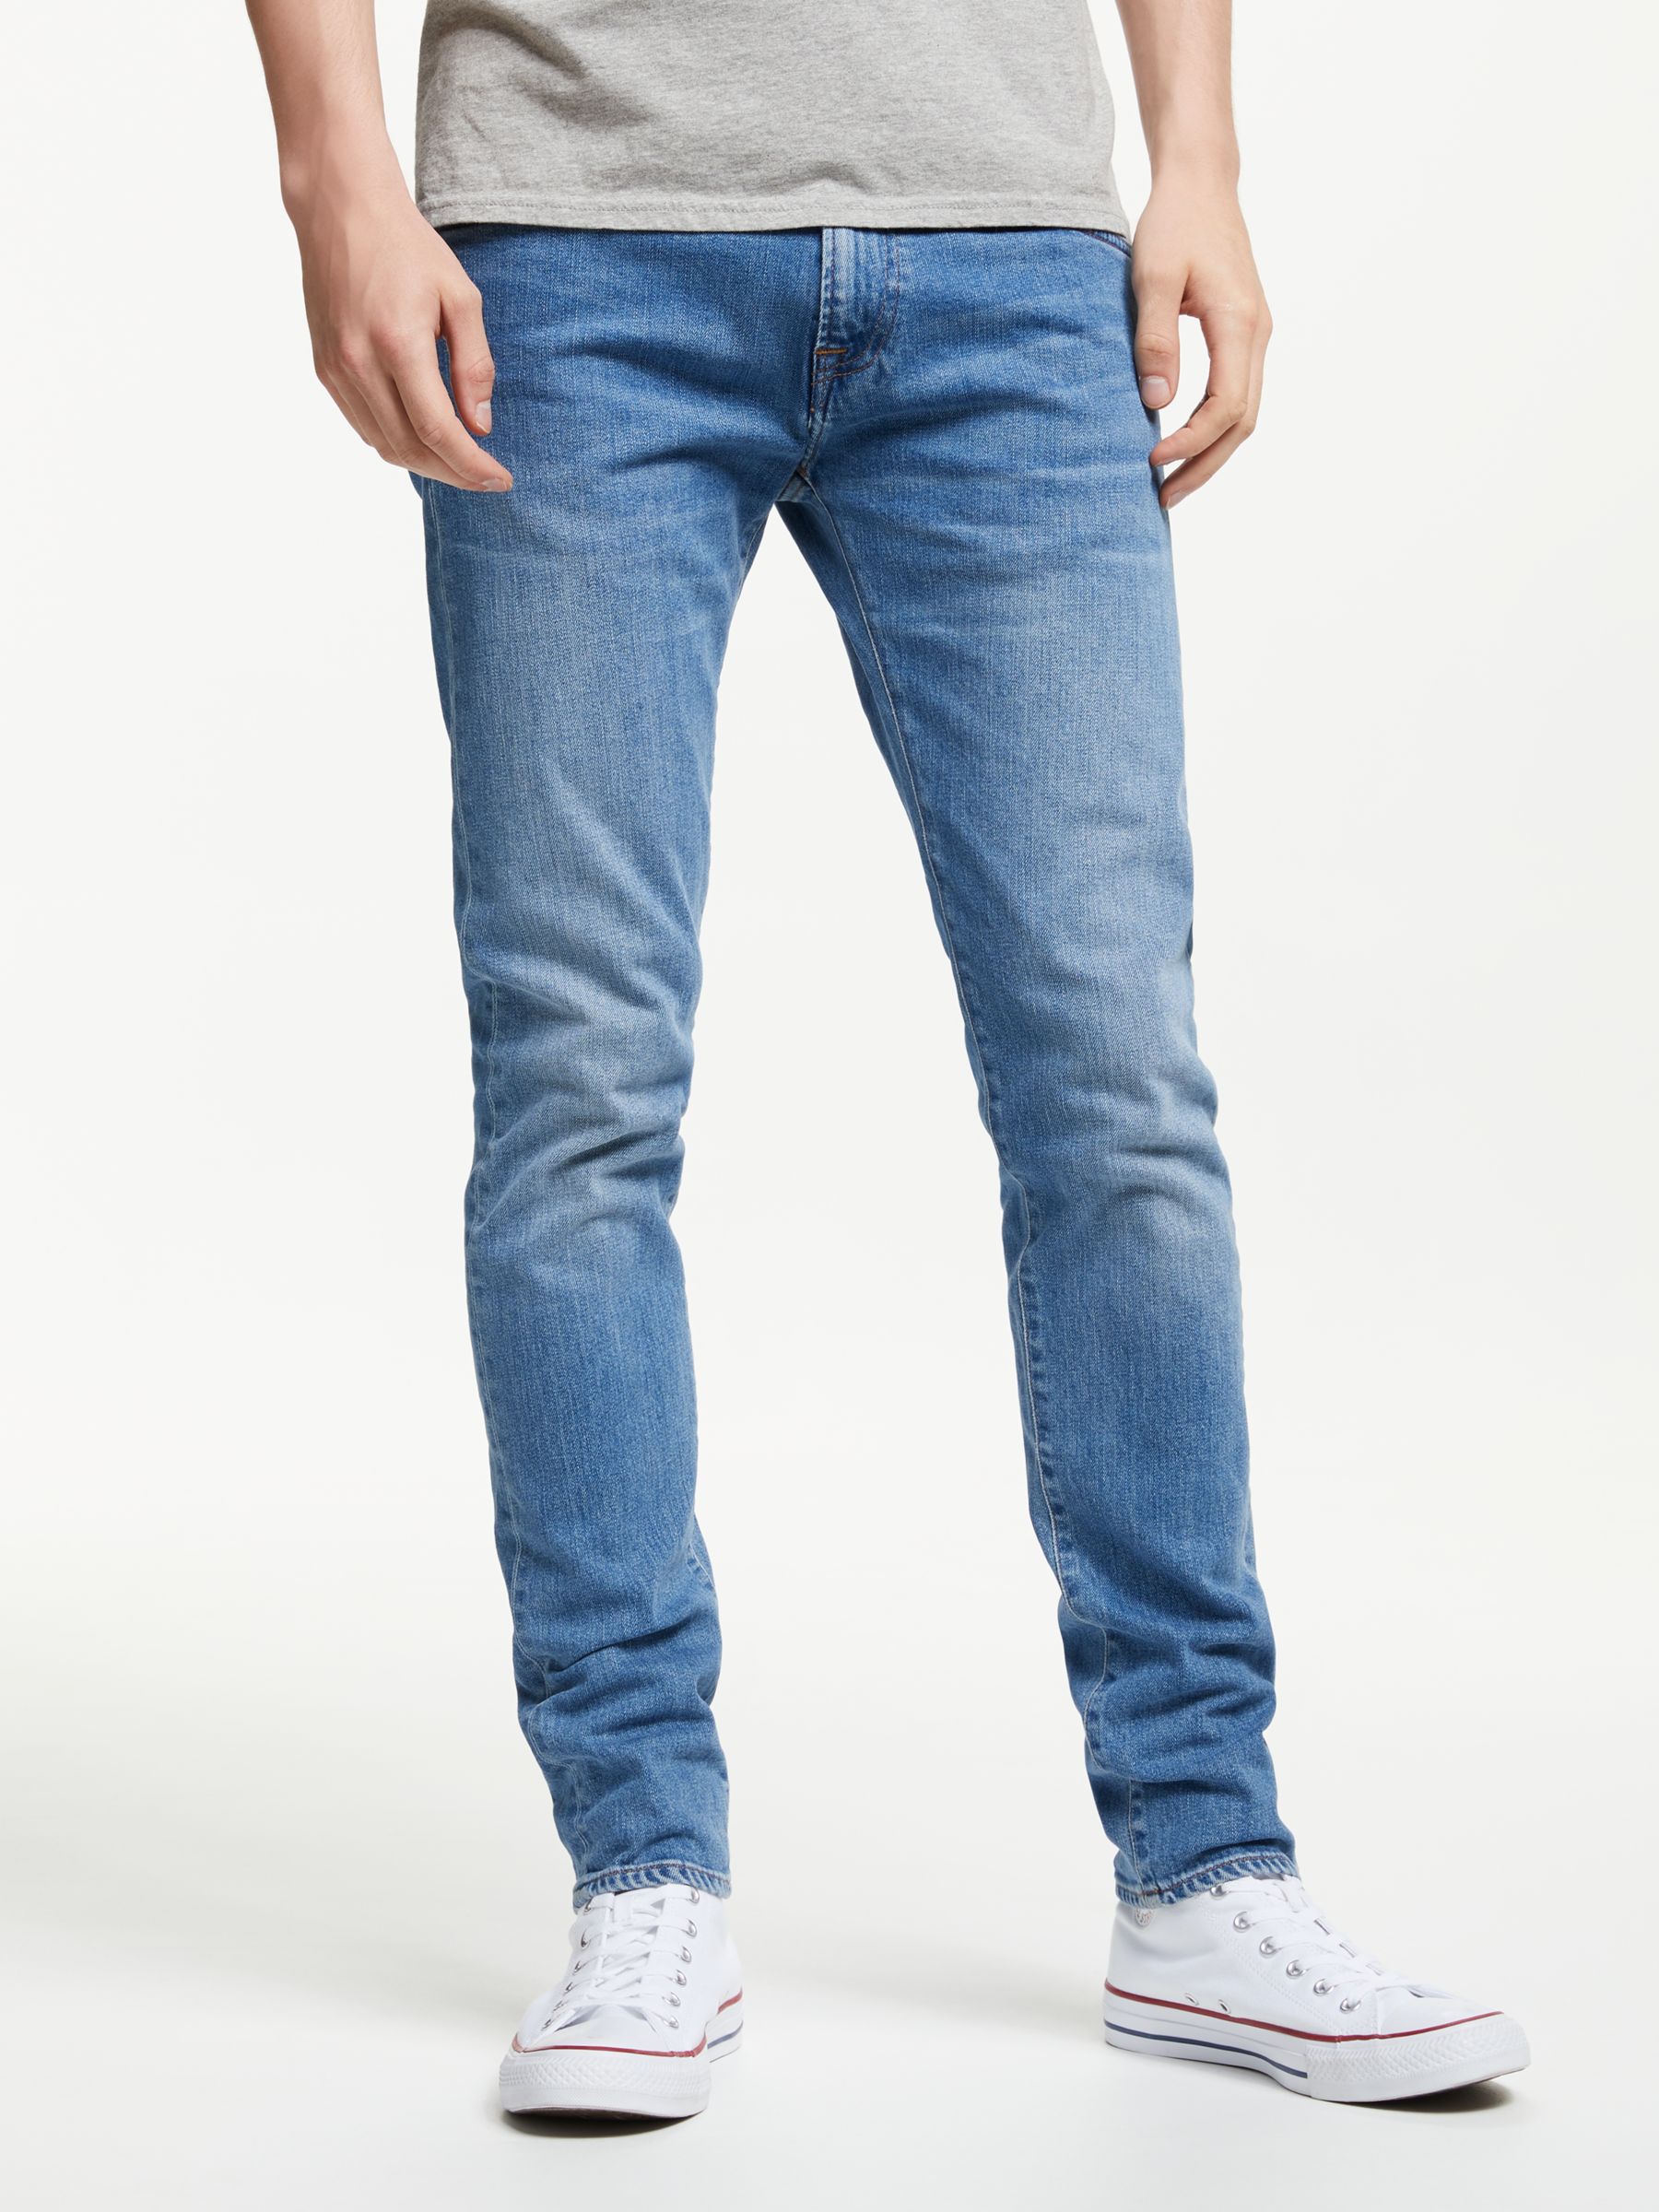 edwin ed 85 slim tapered jeans